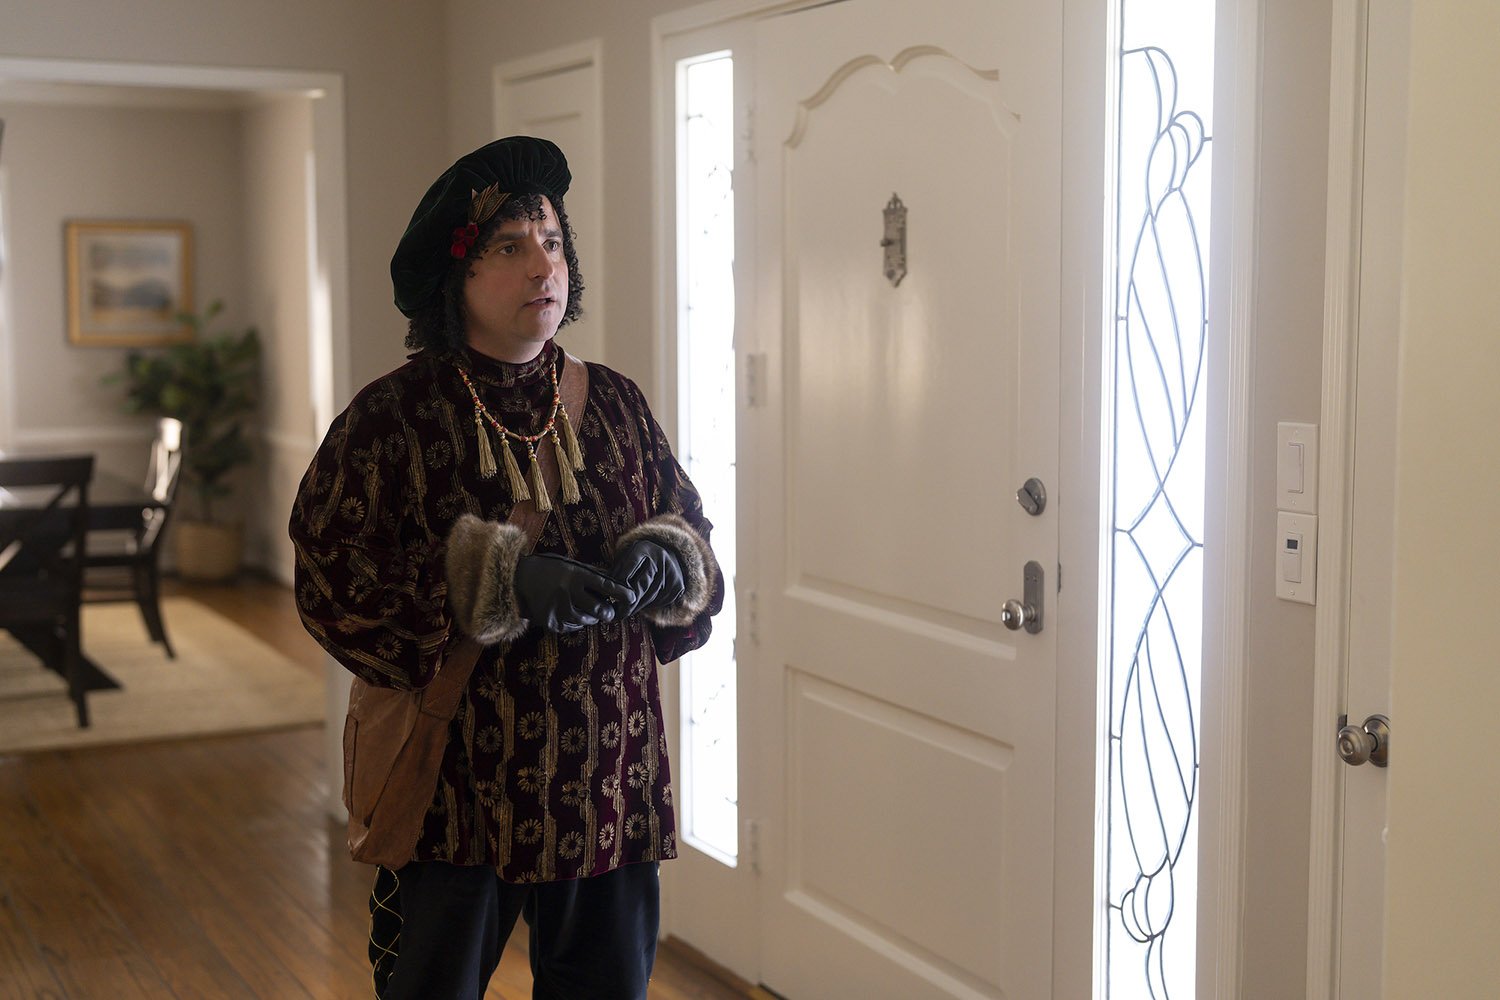 David Krumholtz as Bernard the Elf standing near a front door and looking concerned in The Santa Clauses